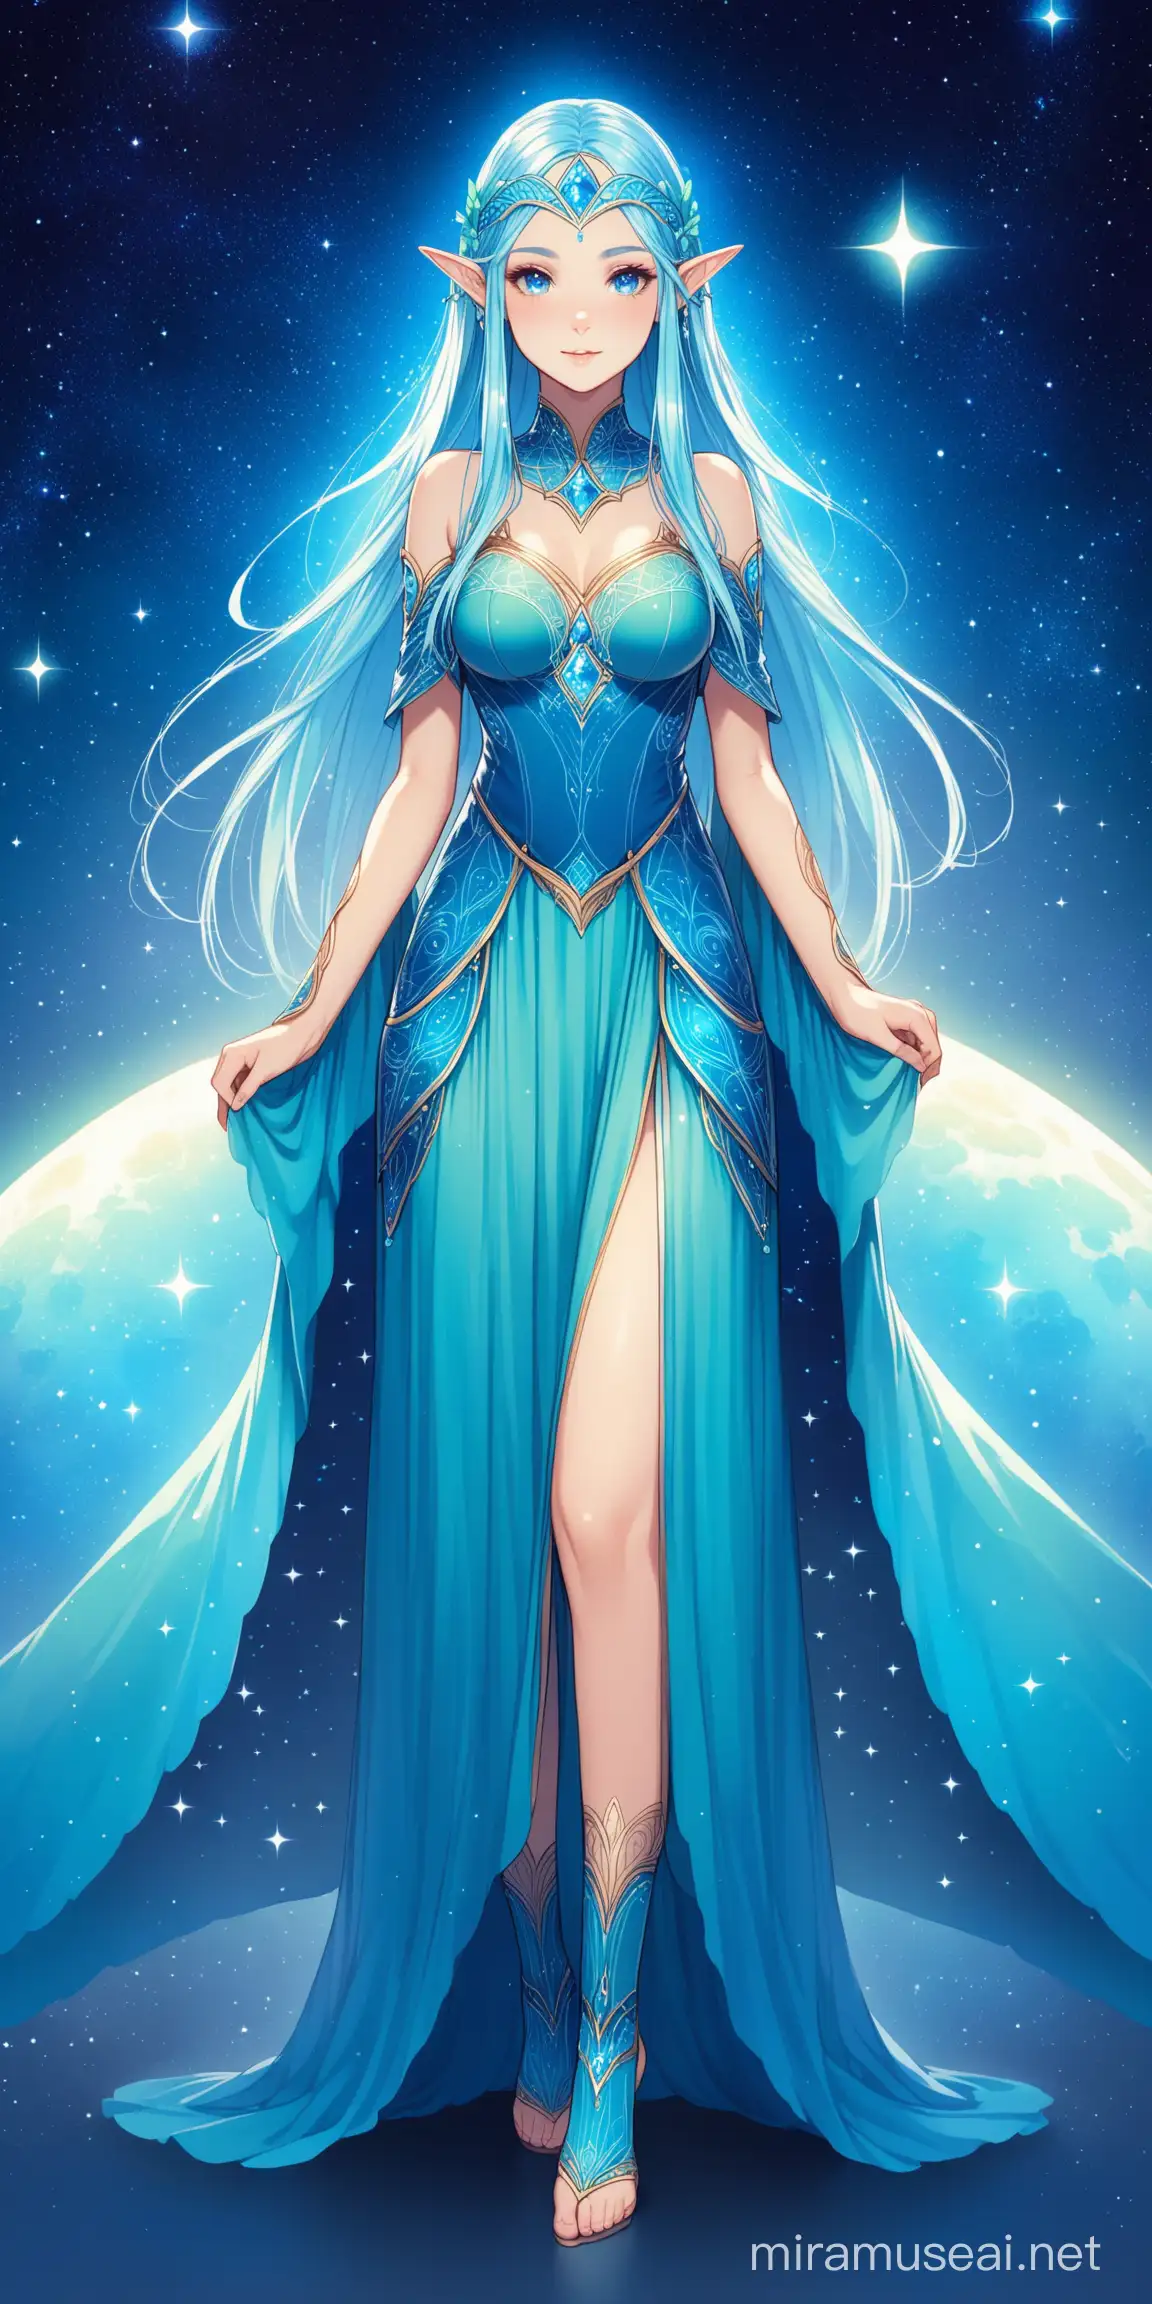 Elven girl, fancy dress, blue hues, front facing, looking into the camera, full body, Celestial theme